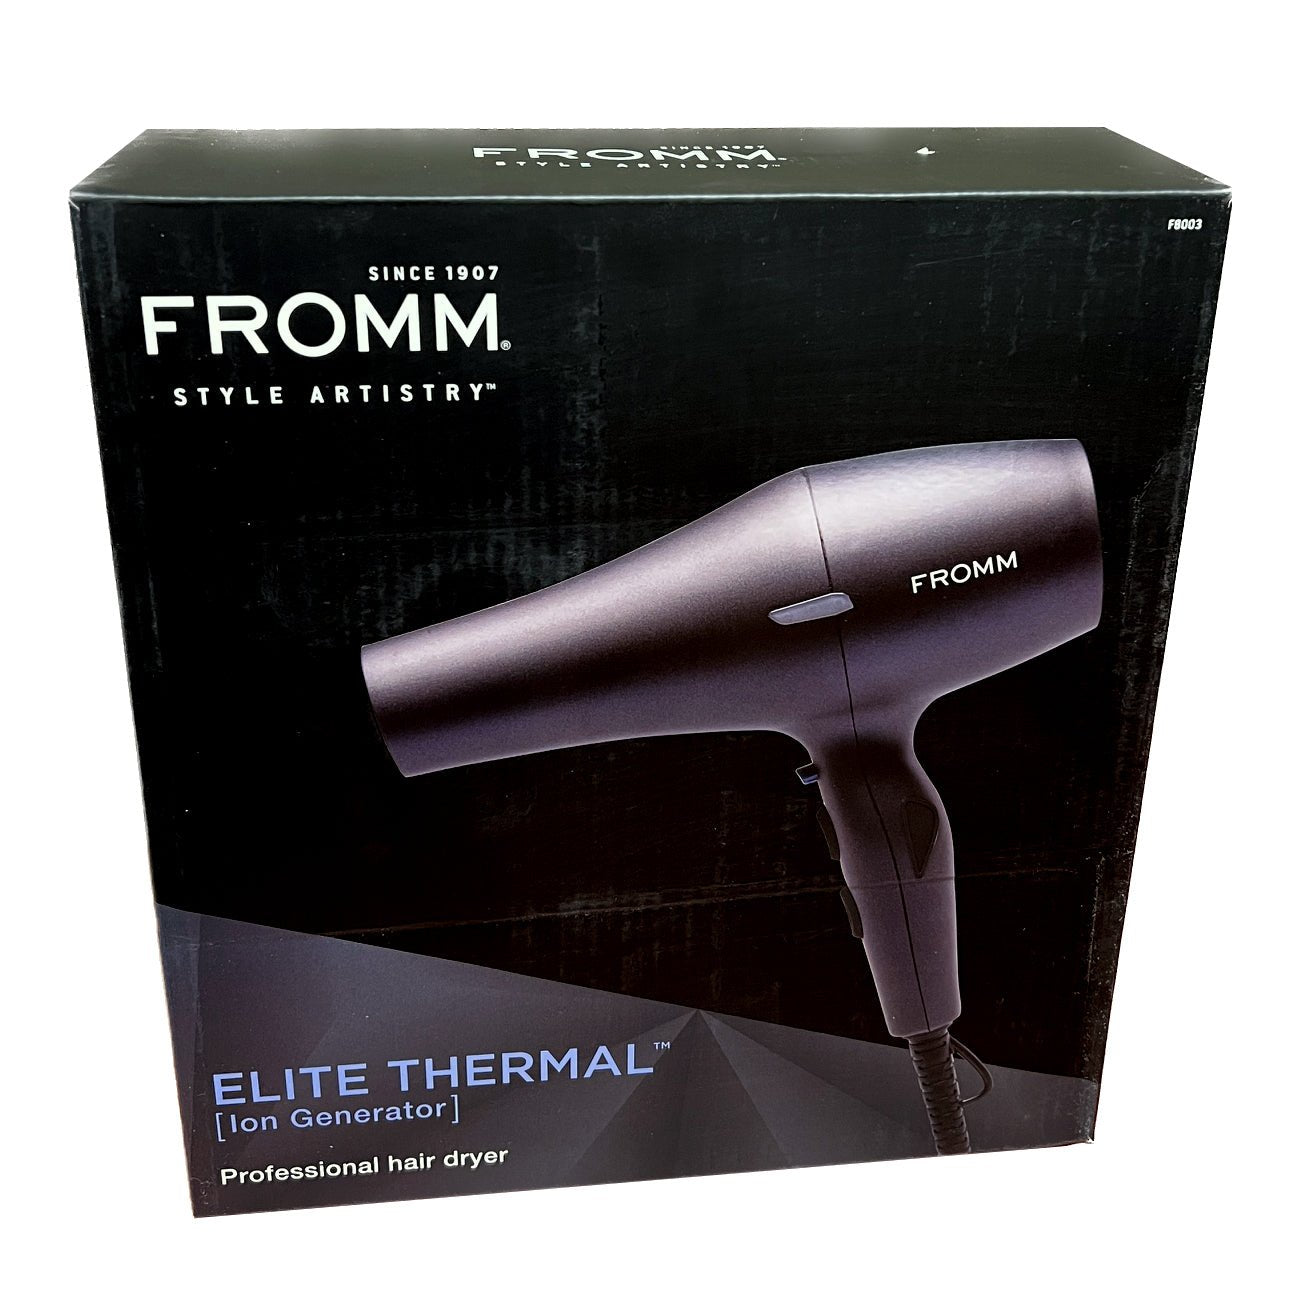 Elite Thermal [Ion Generator] Professional Hair Dryer | F8003 | FROMM - SH Salons